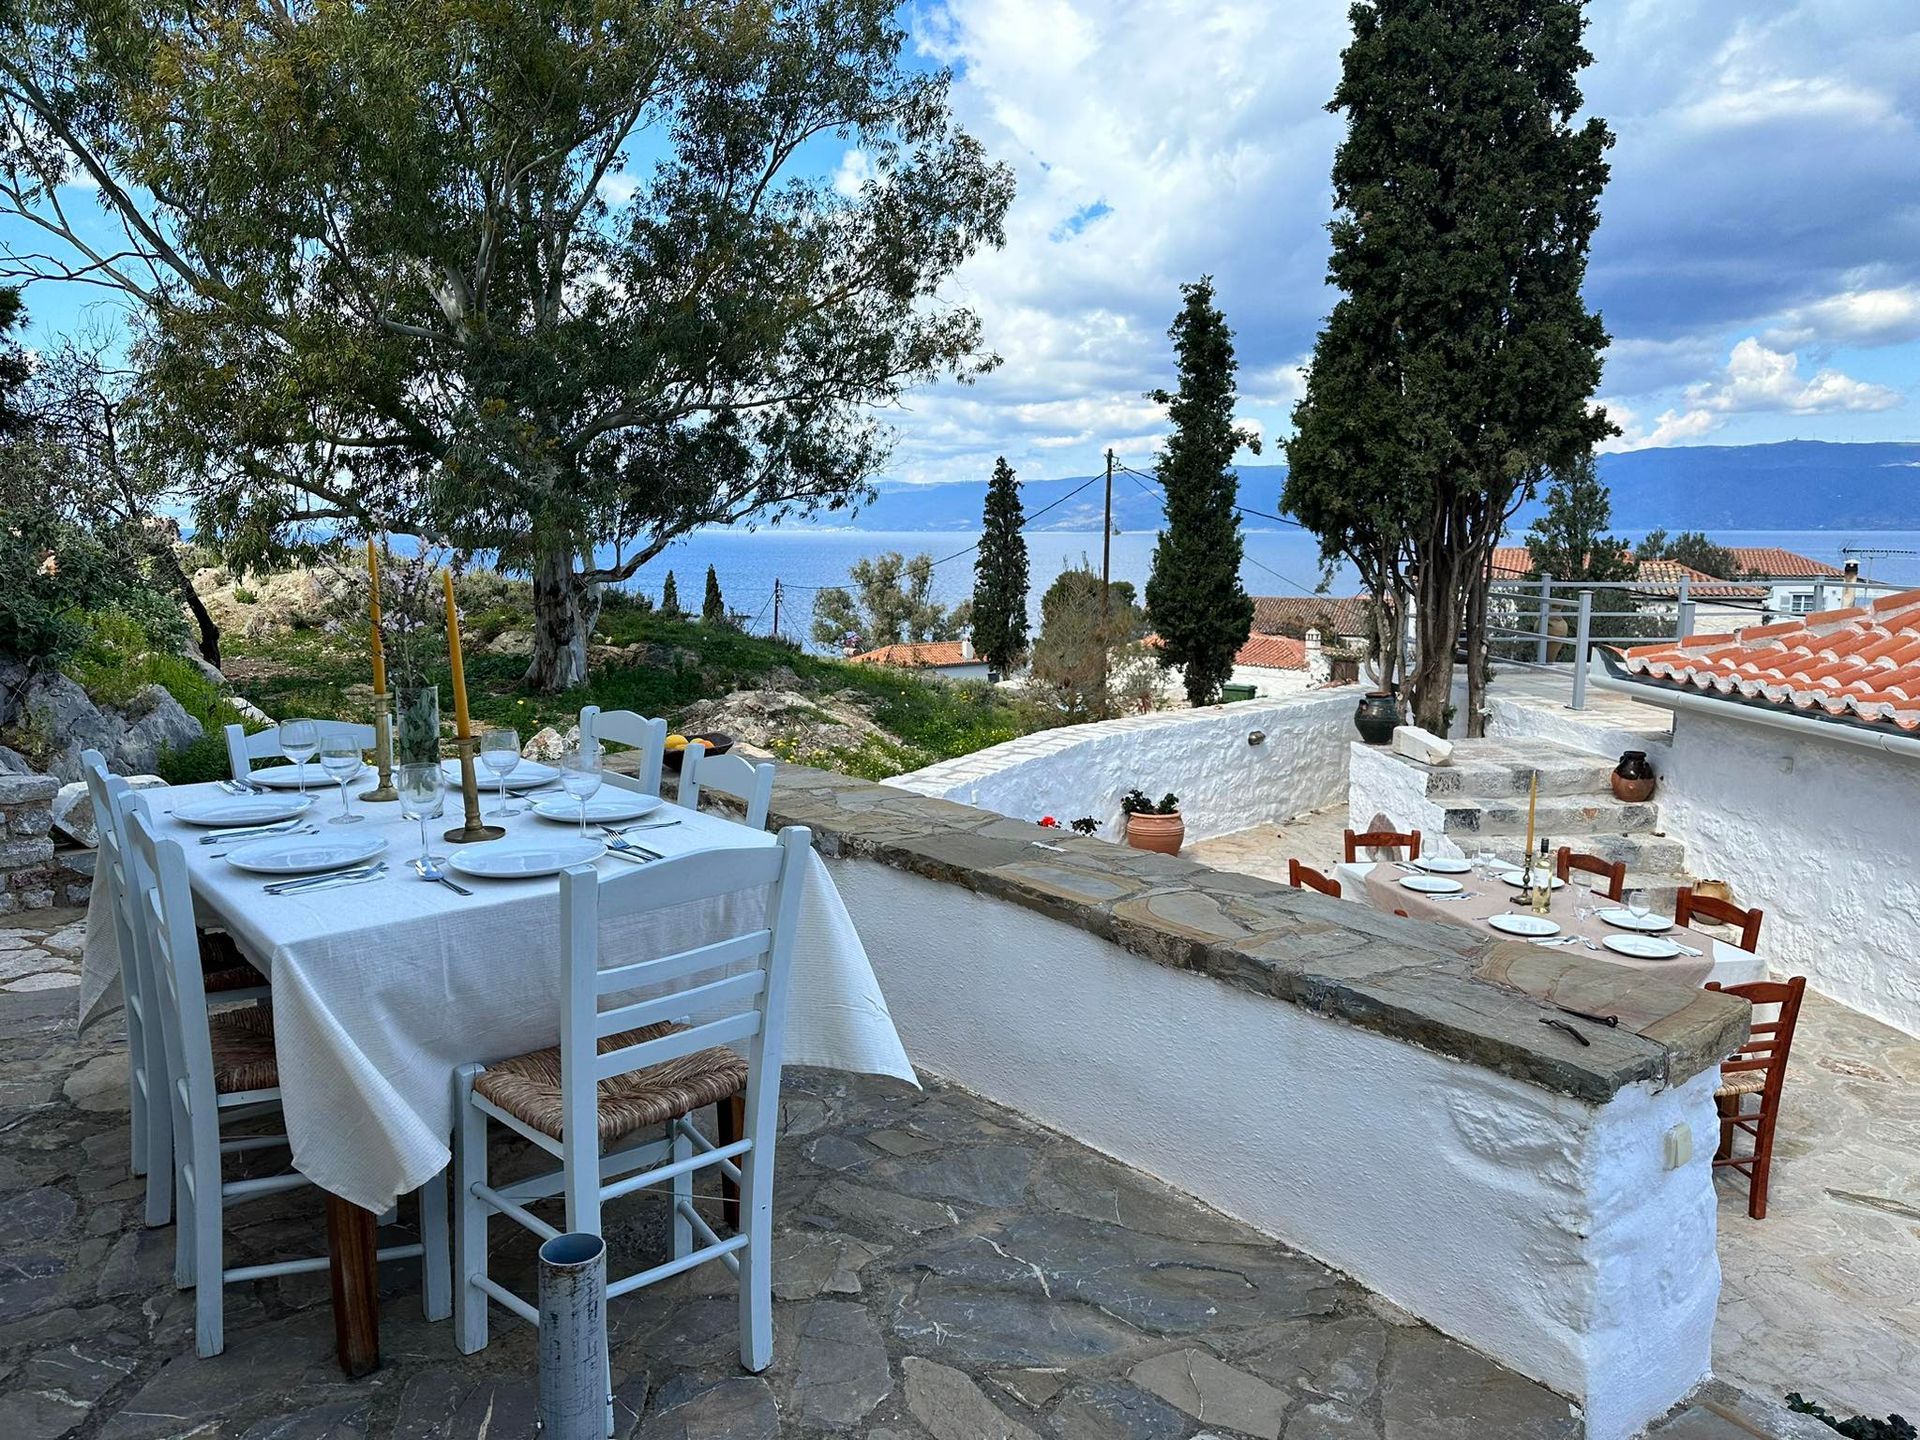 Ideal small, private celebration location at Hydra Homesteads, luxury holiday accommodation on Hydra Island Greece.